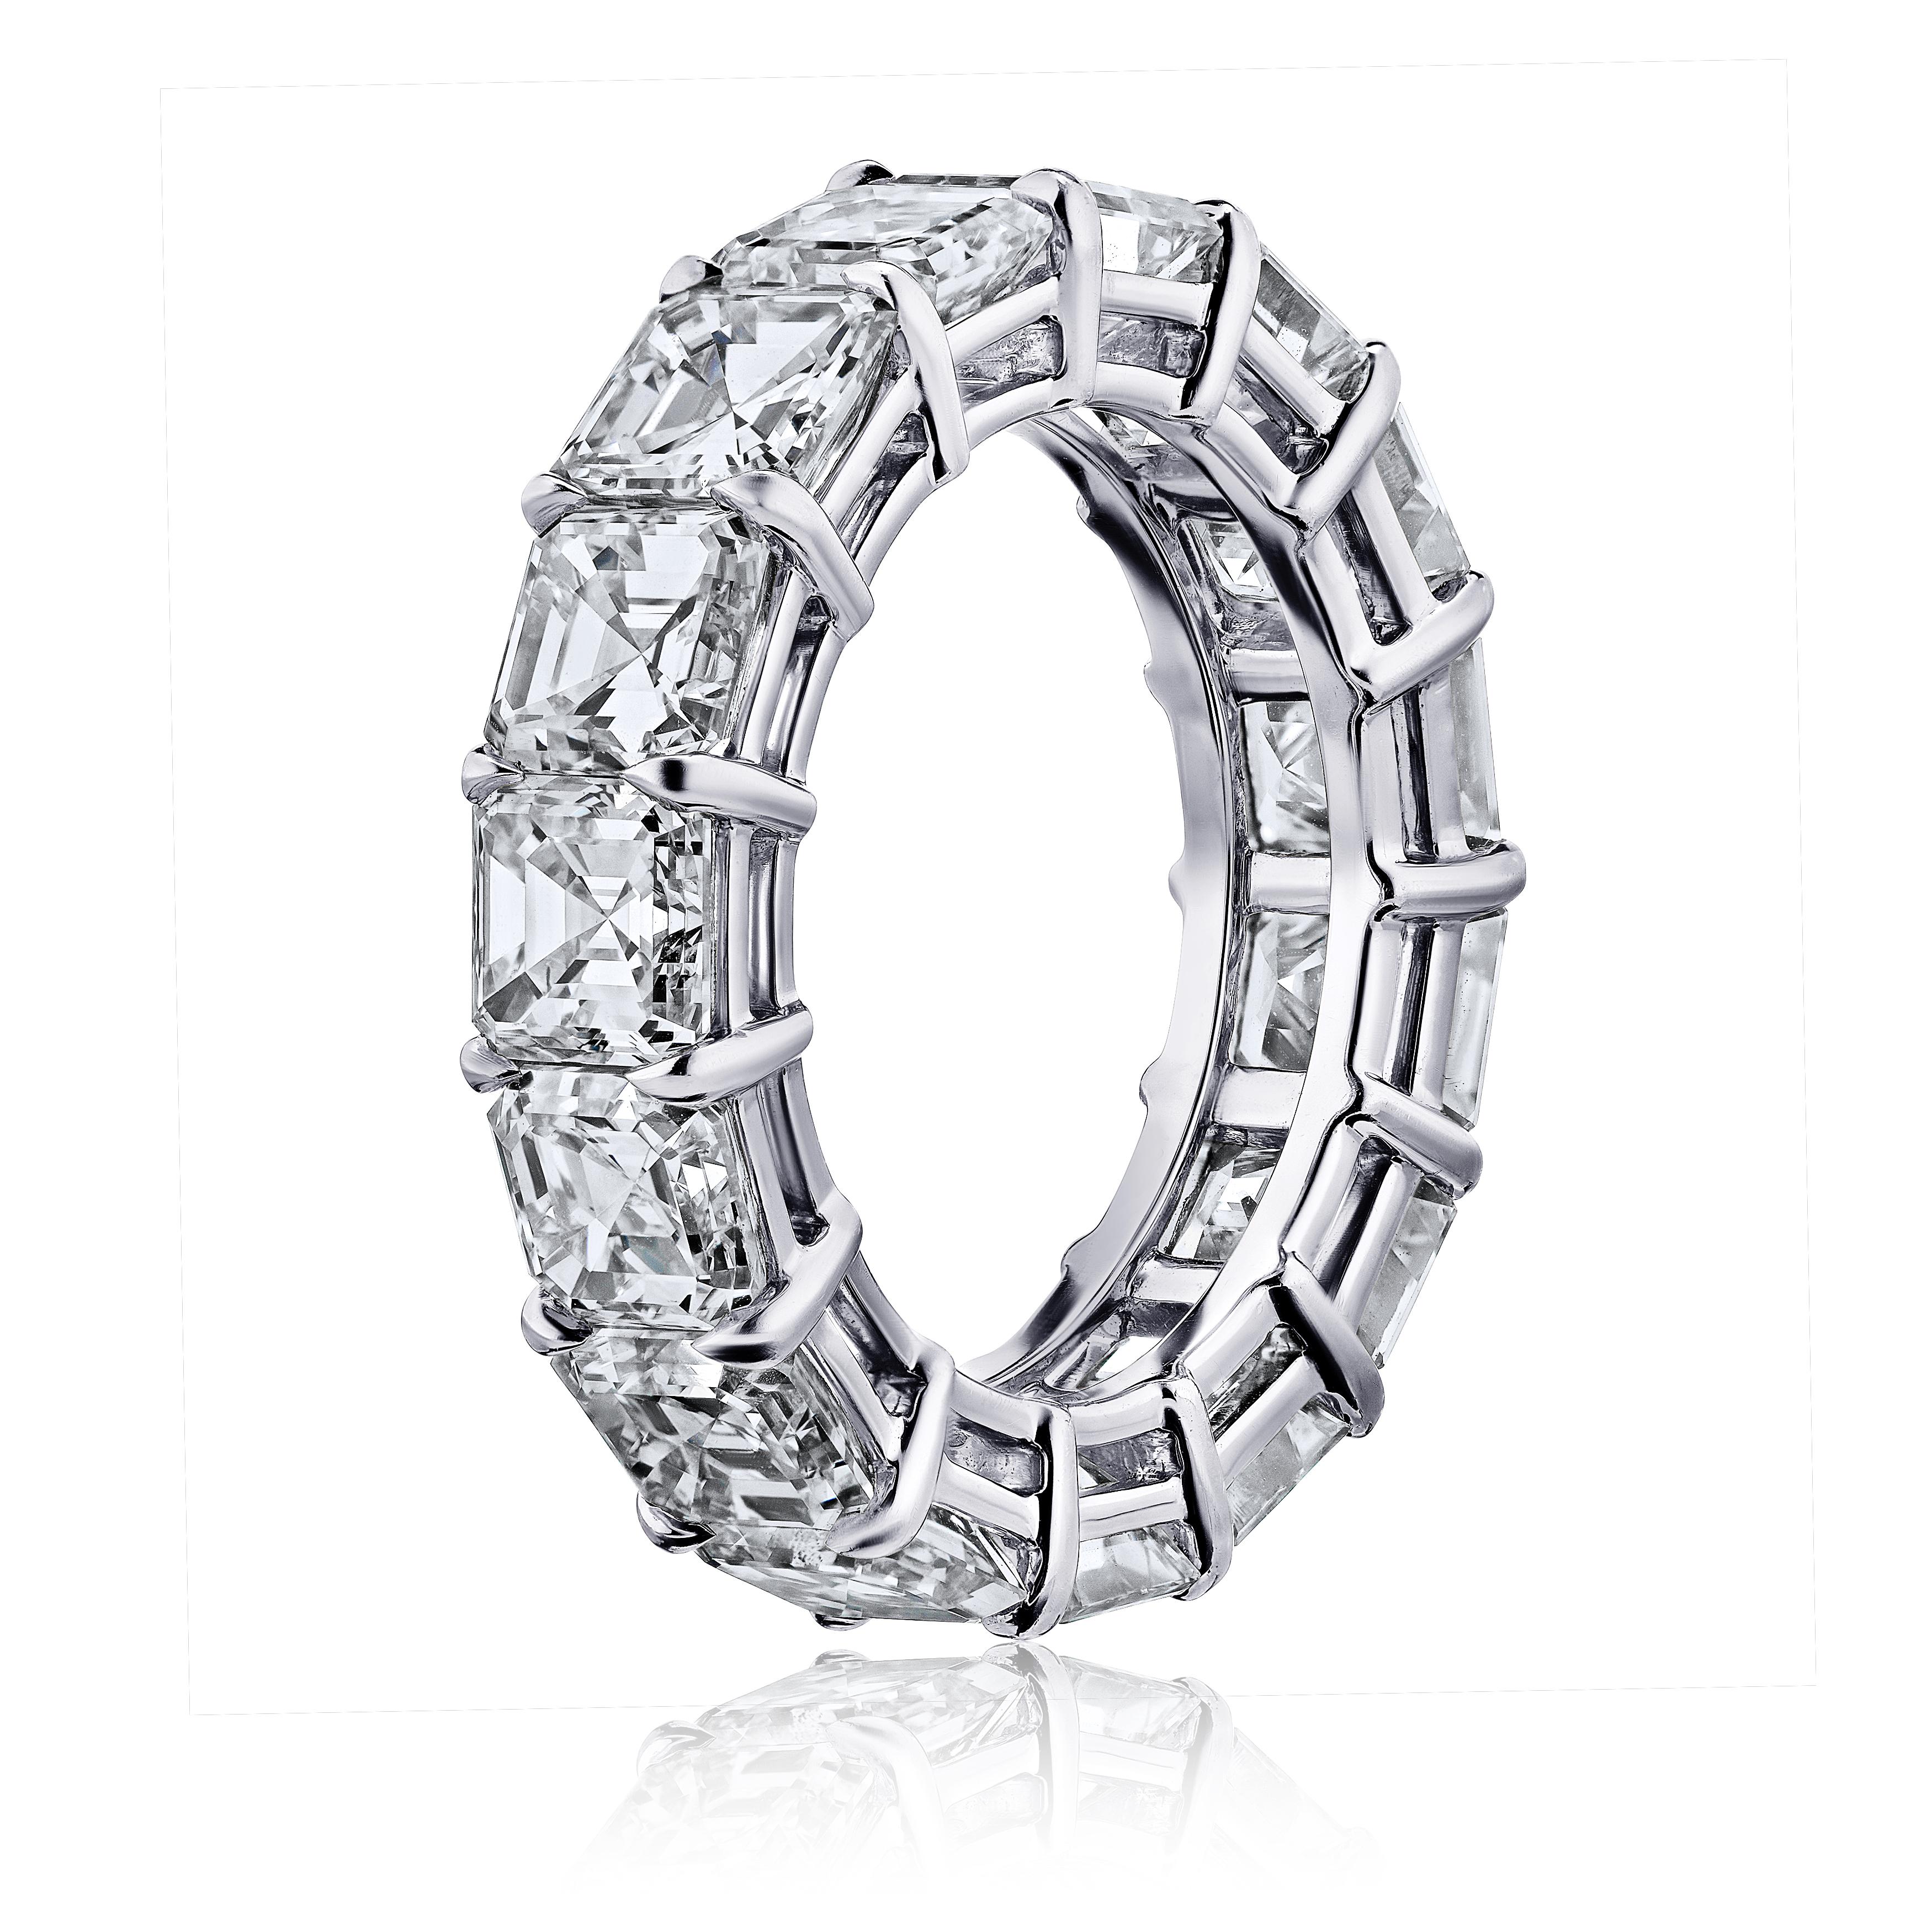 Asscher Cut diamond ring platinum eternity band shared prong style with a gallery.
15 perfectly matched diamonds weighing a minimum of 7.50 cts. G.I.A certificates for each diamond . Ranging from D-F in color . VVS1-VS2 in clarity .Finger size 6.